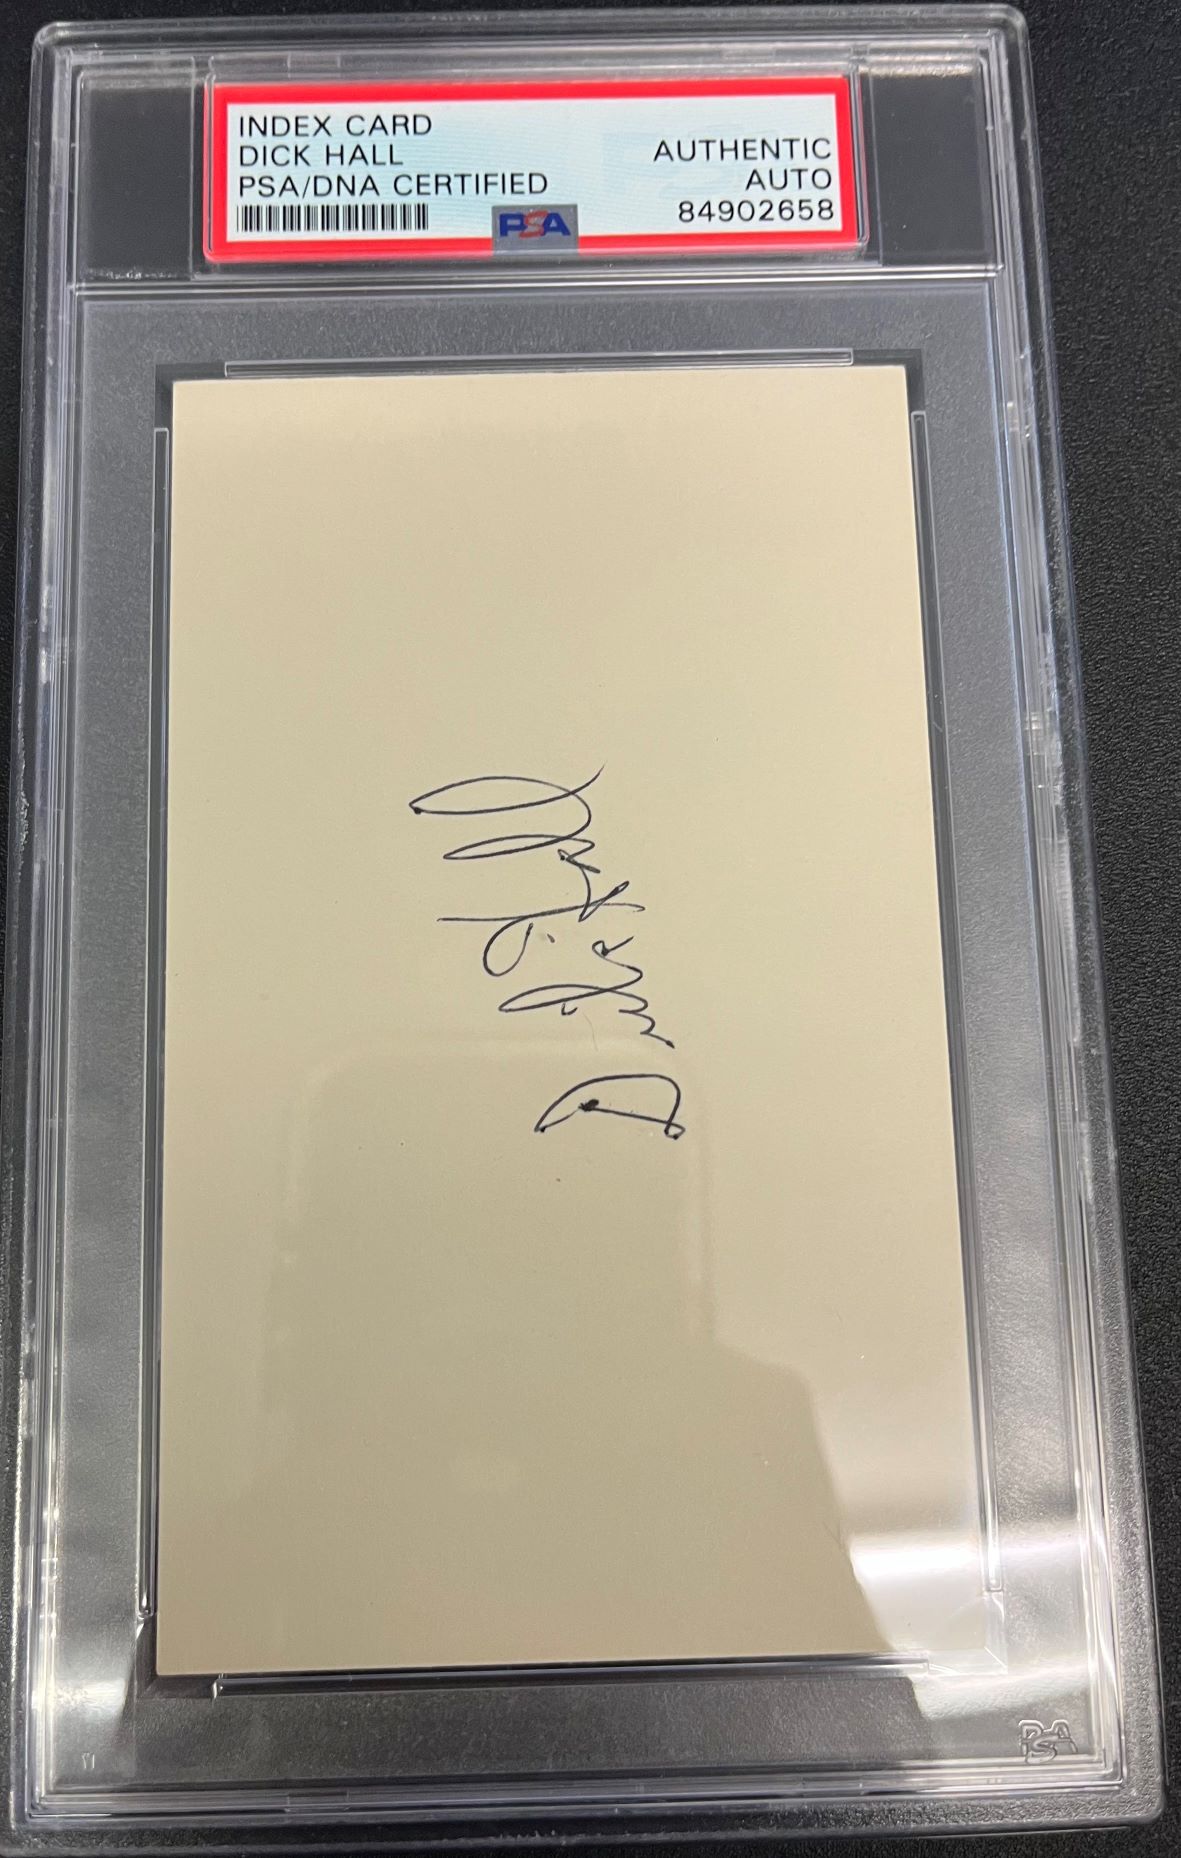 Dick Hall Signed Index Card PSA Auto